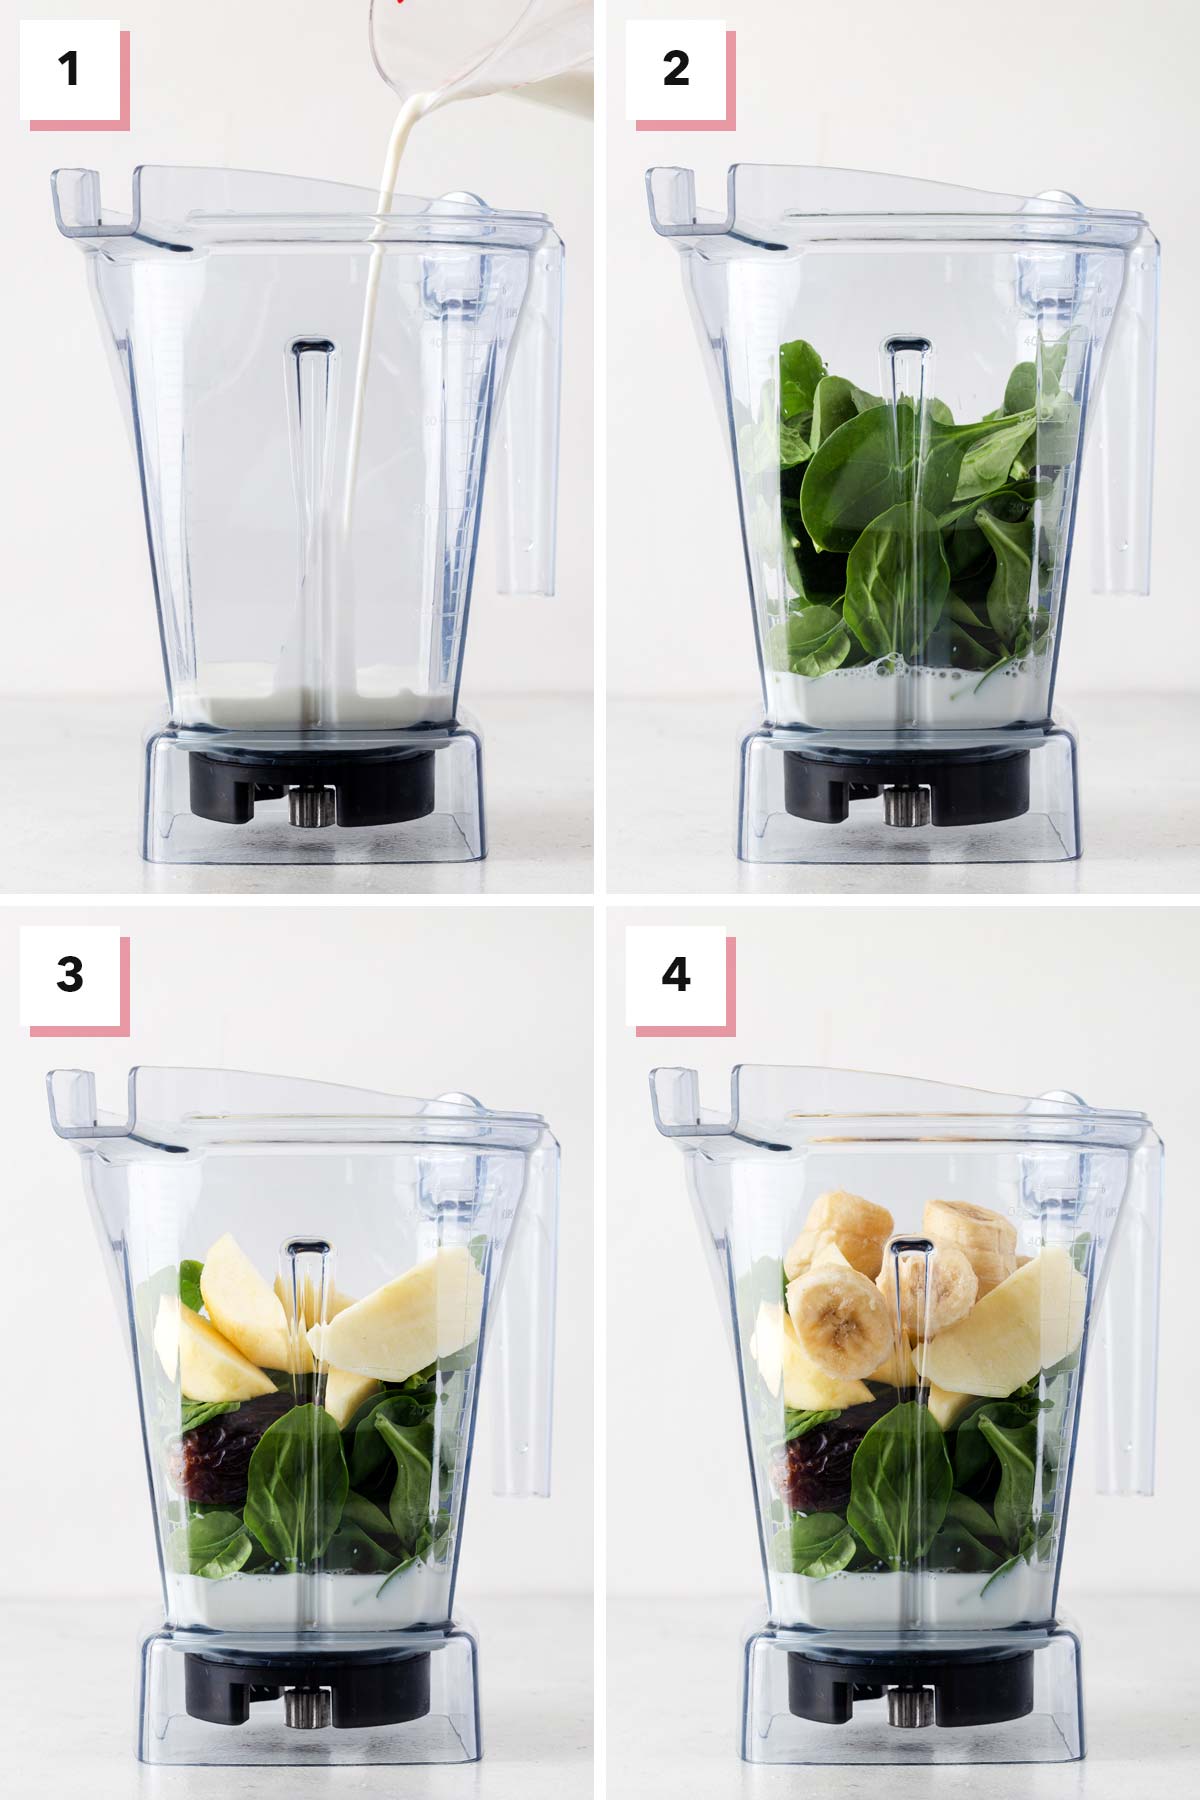 Steps to make a green smoothie in a blender.